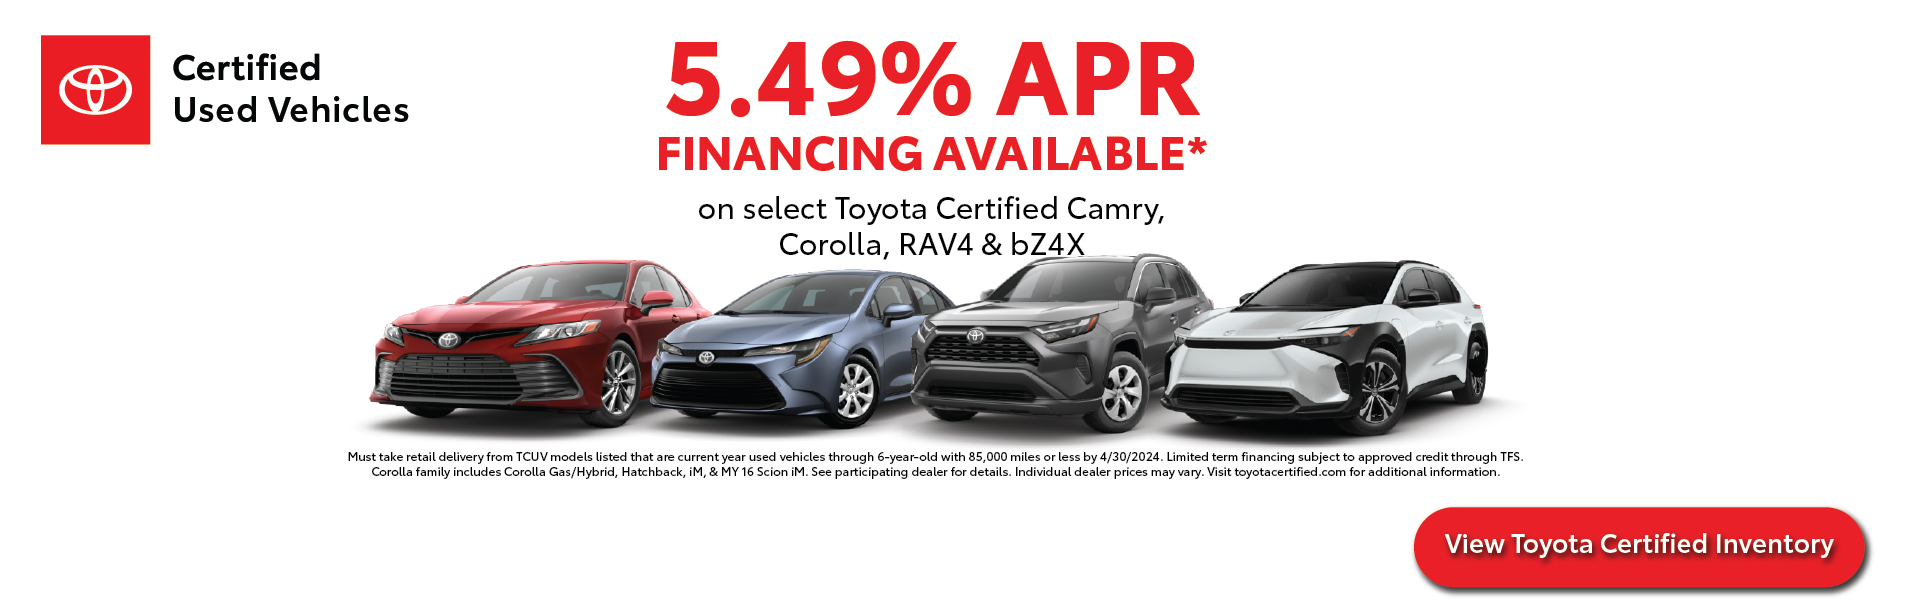 Toyota Certified Used Vehicle Offer | ToyotaDemo1 in Derwood MD